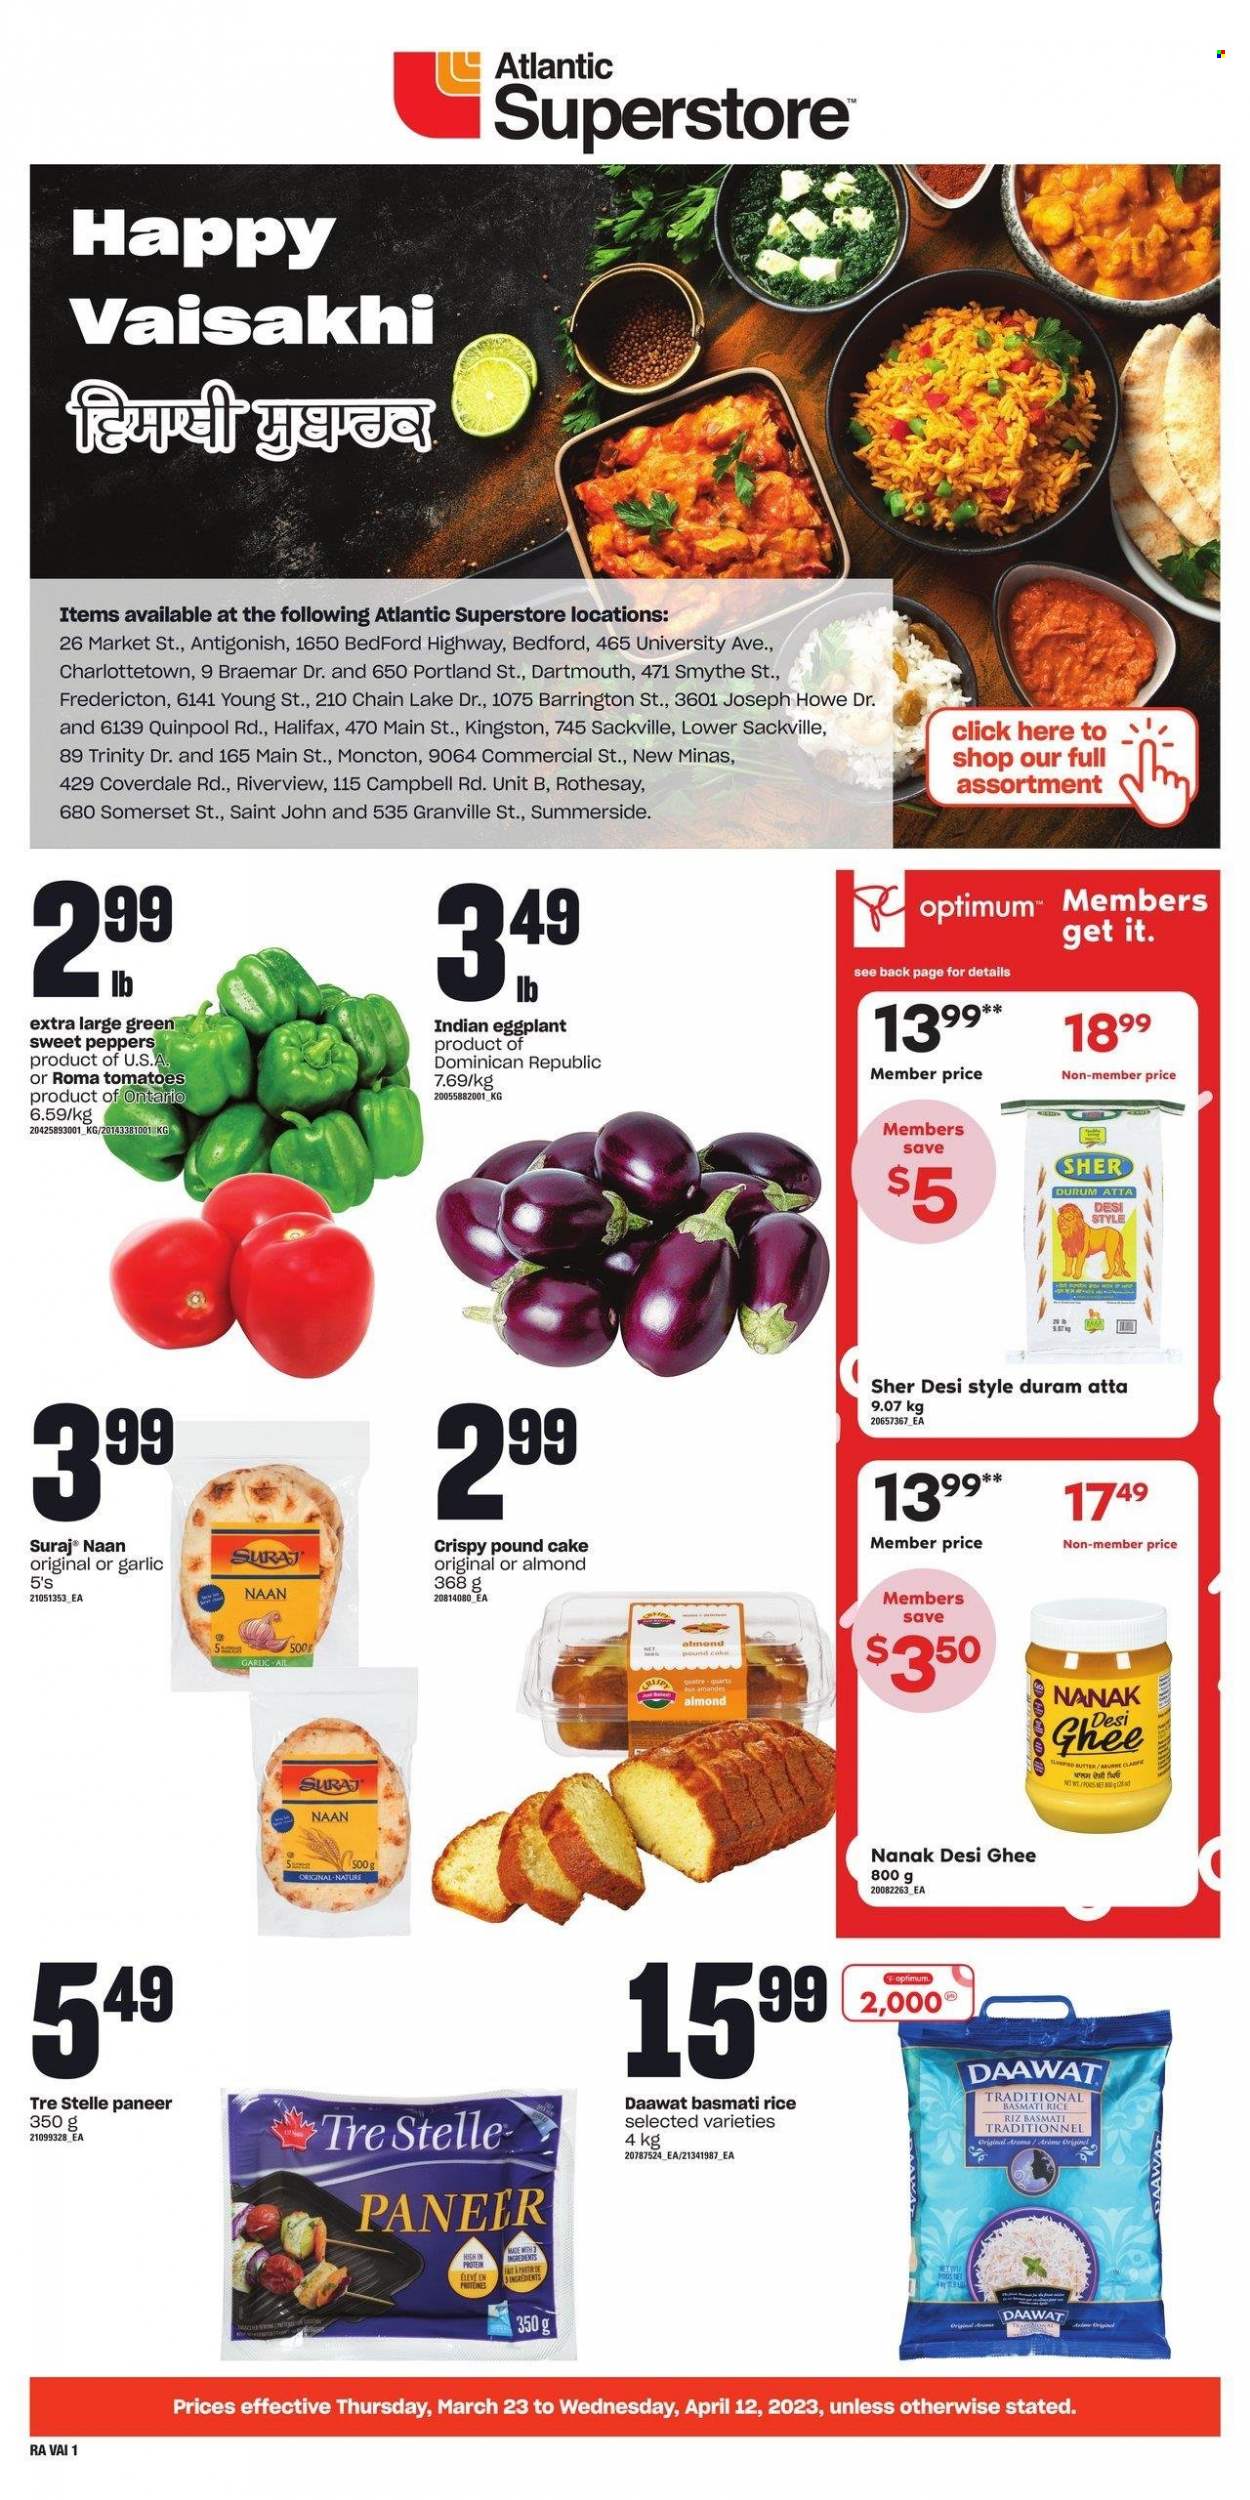 thumbnail - Atlantic Superstore Flyer - March 23, 2023 - April 12, 2023 - Sales products - cake, pound cake, garlic, sweet peppers, tomatoes, peppers, eggplant, paneer, ghee, flour, basmati rice, Optimum. Page 1.